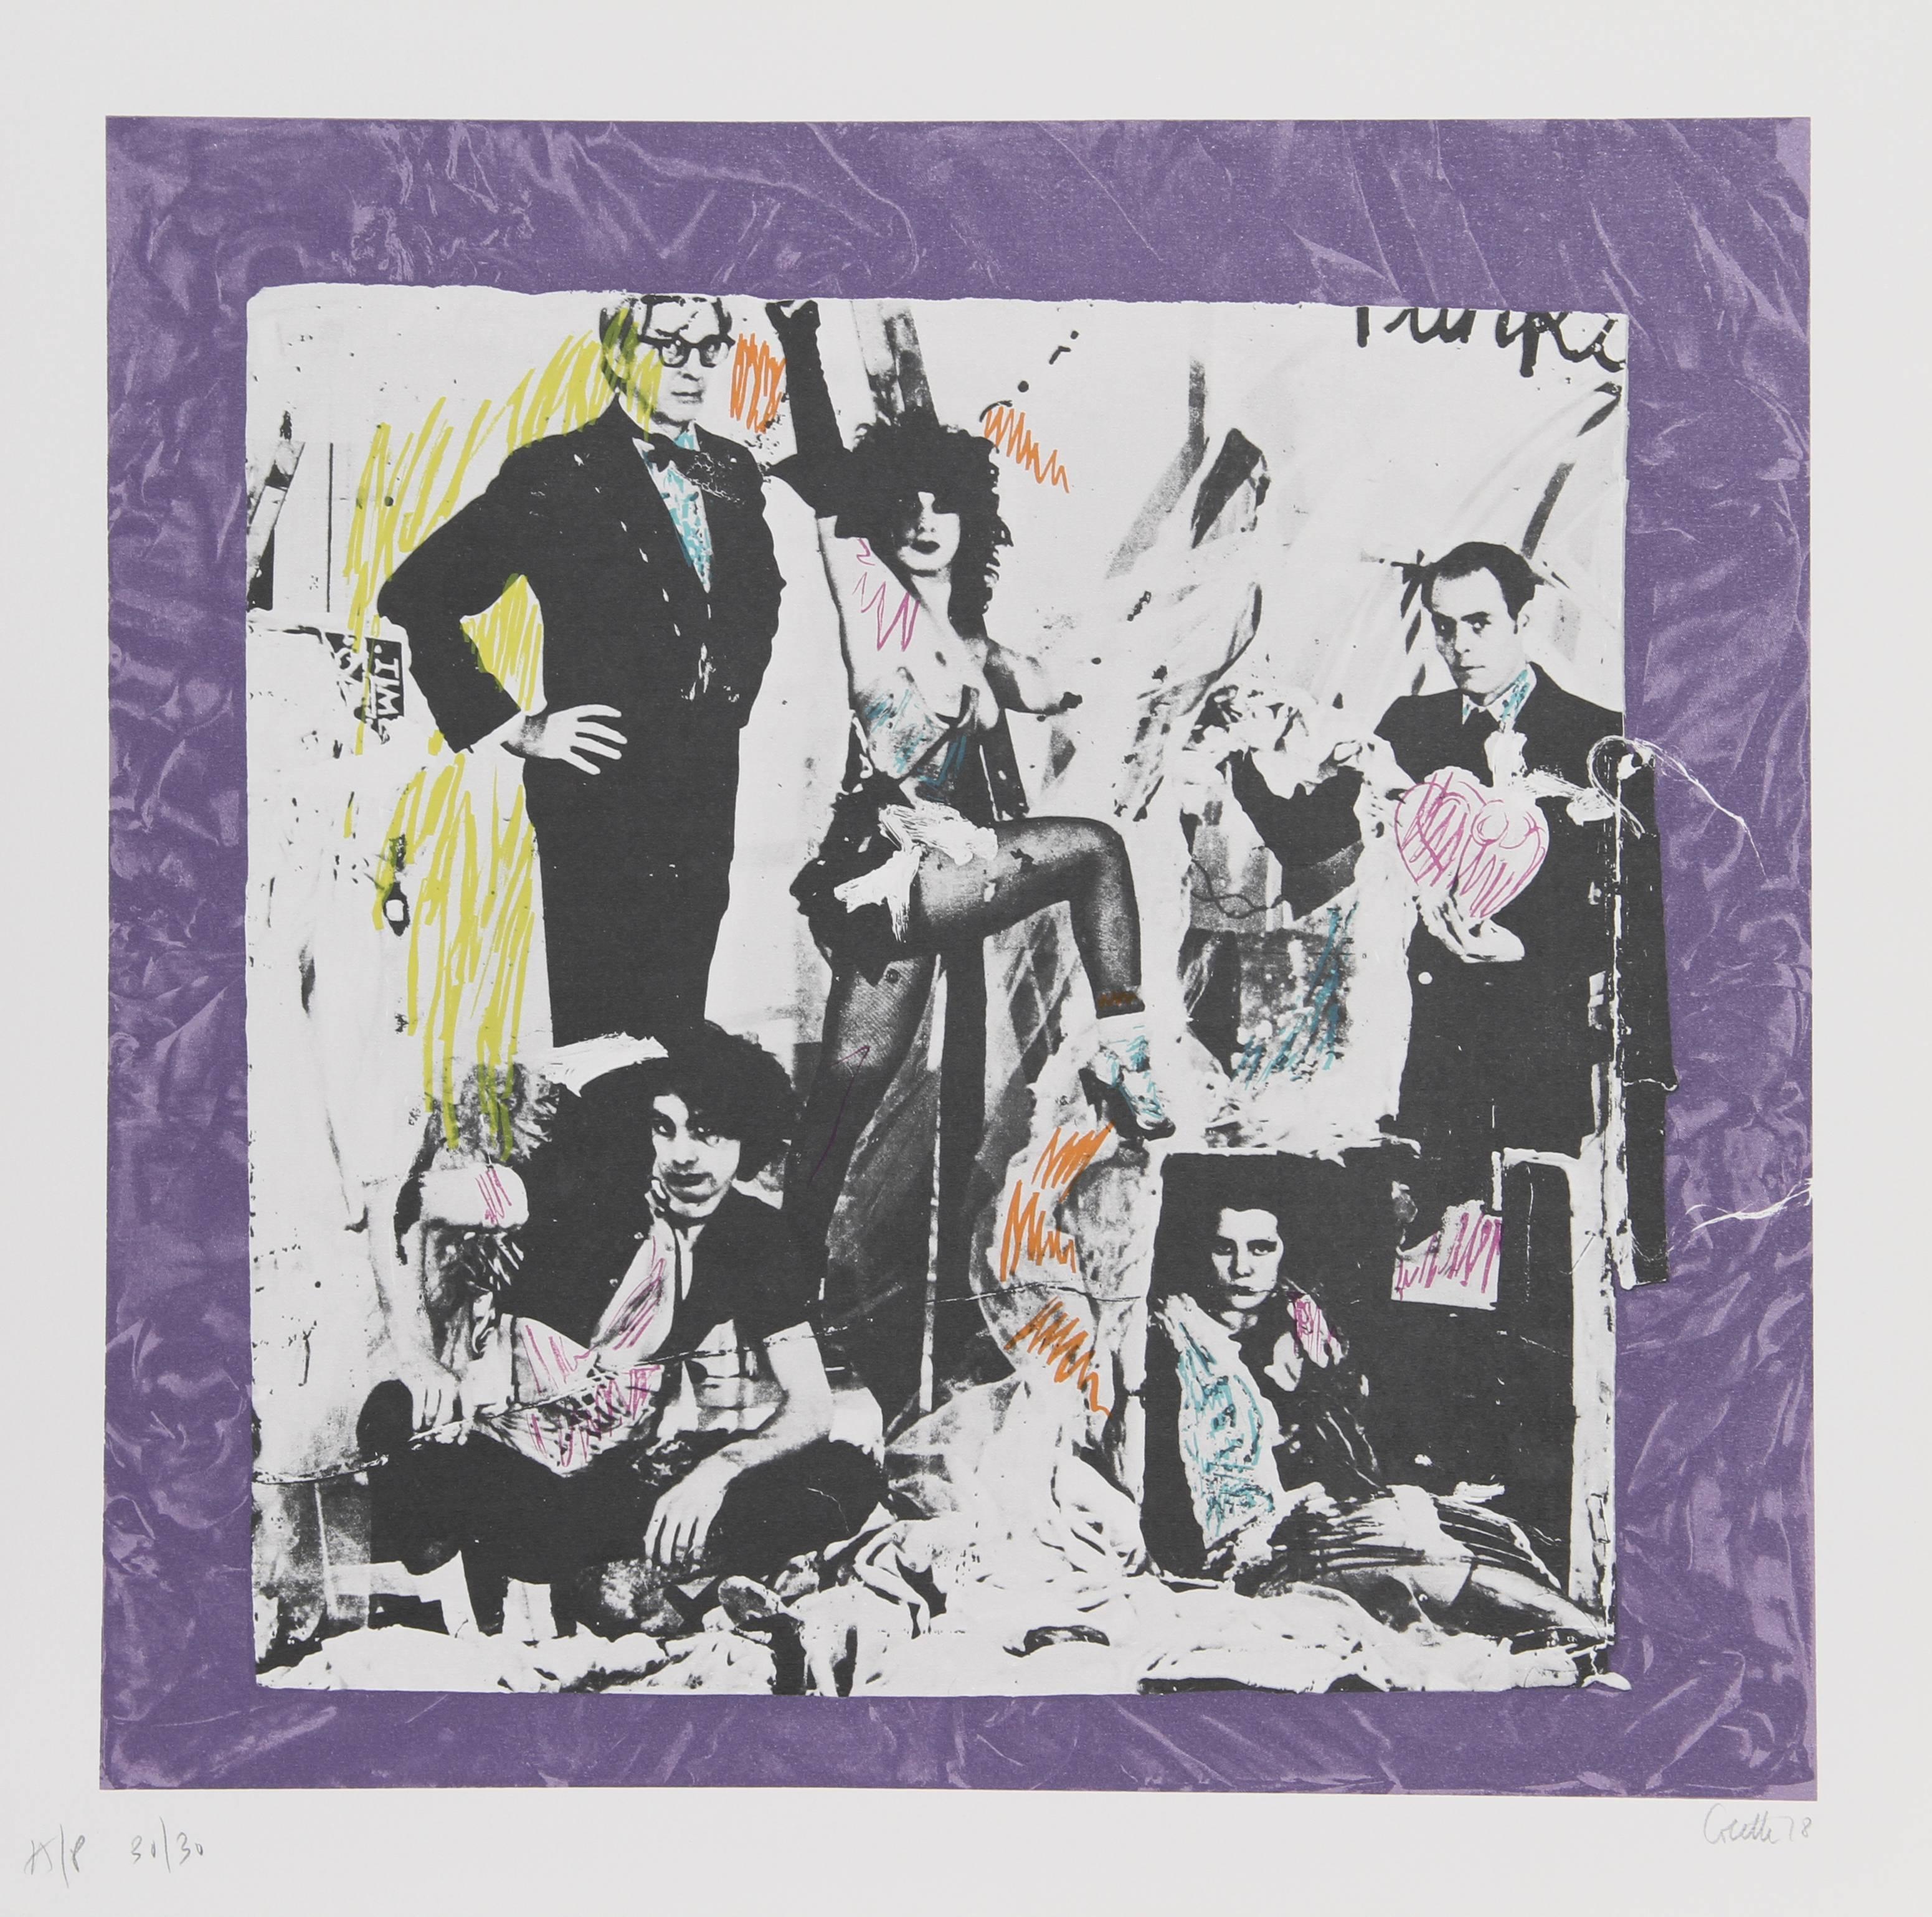 Artist: Colette
Title: Justine and the Victorian Punks (Warhol)
Year: 1978
Medium: Lithograph, signed in pencil
Edition: 200, 30 AP's
Image Size: 19 x 19 inches
Size: 22 in. x 22 in. (55.88 cm x 55.88 cm)